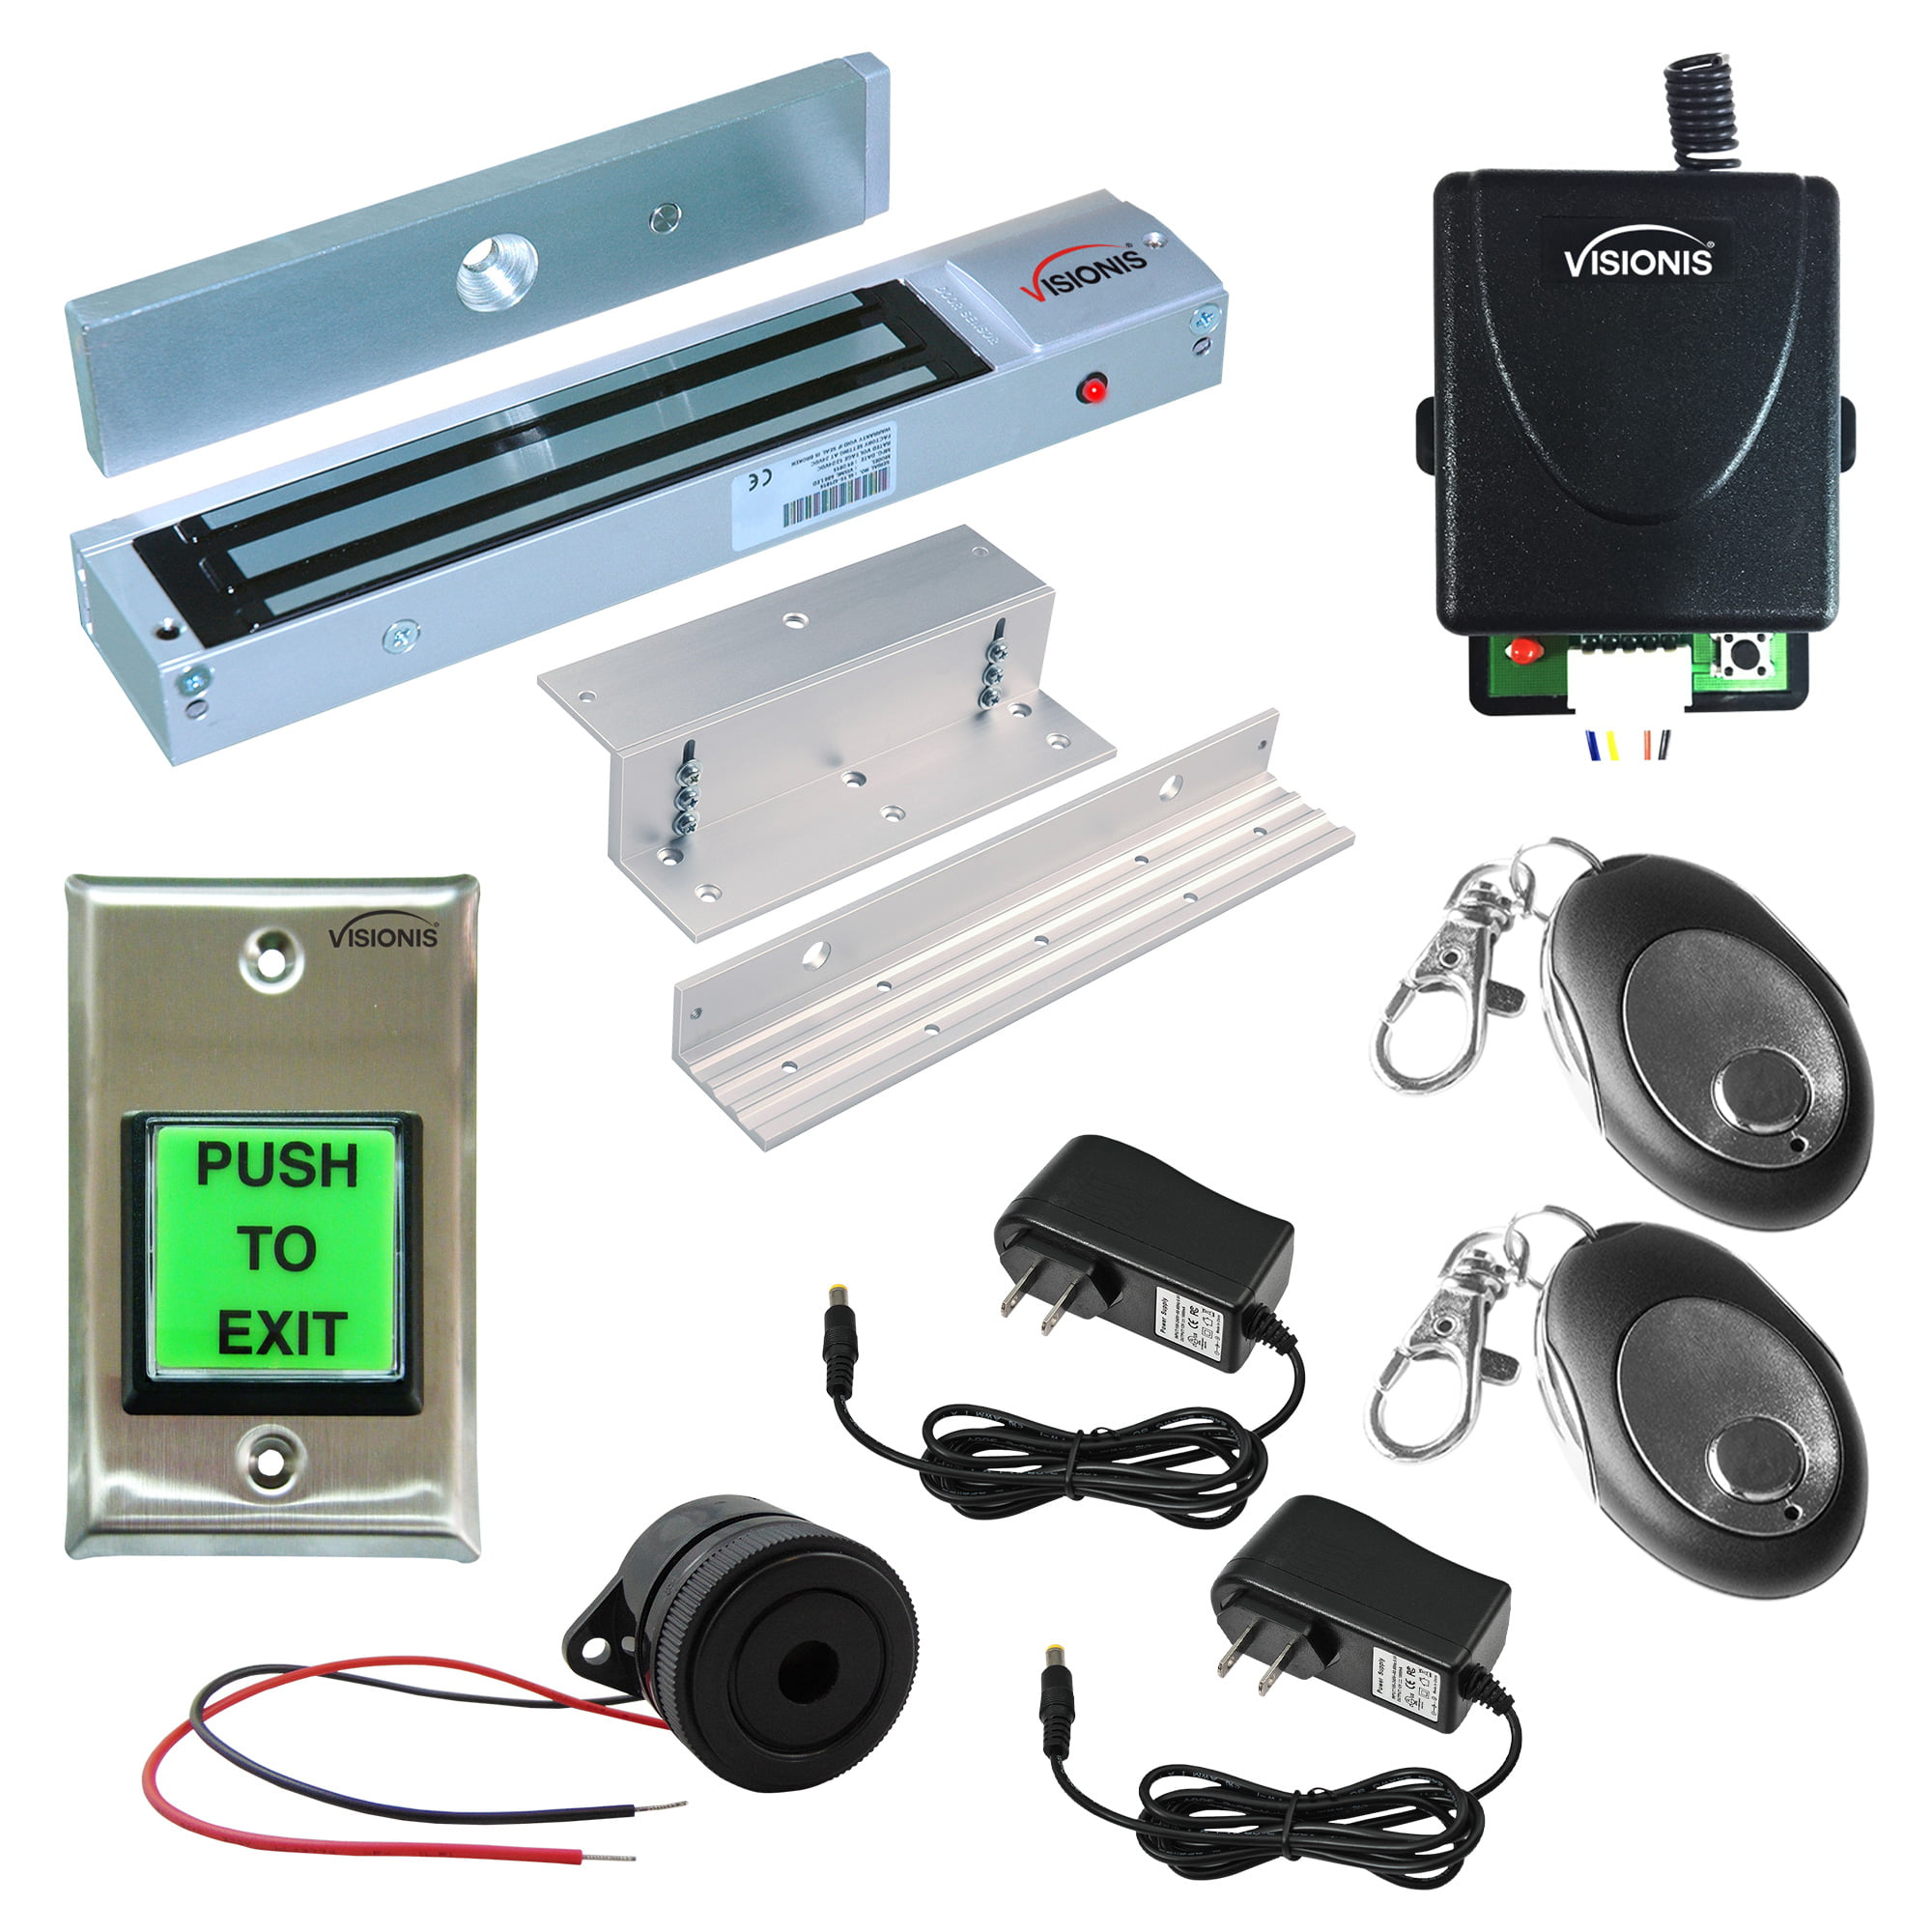 Visionis Door Entry System Mag Lock Kit with Wireless Remote and Exit Button 